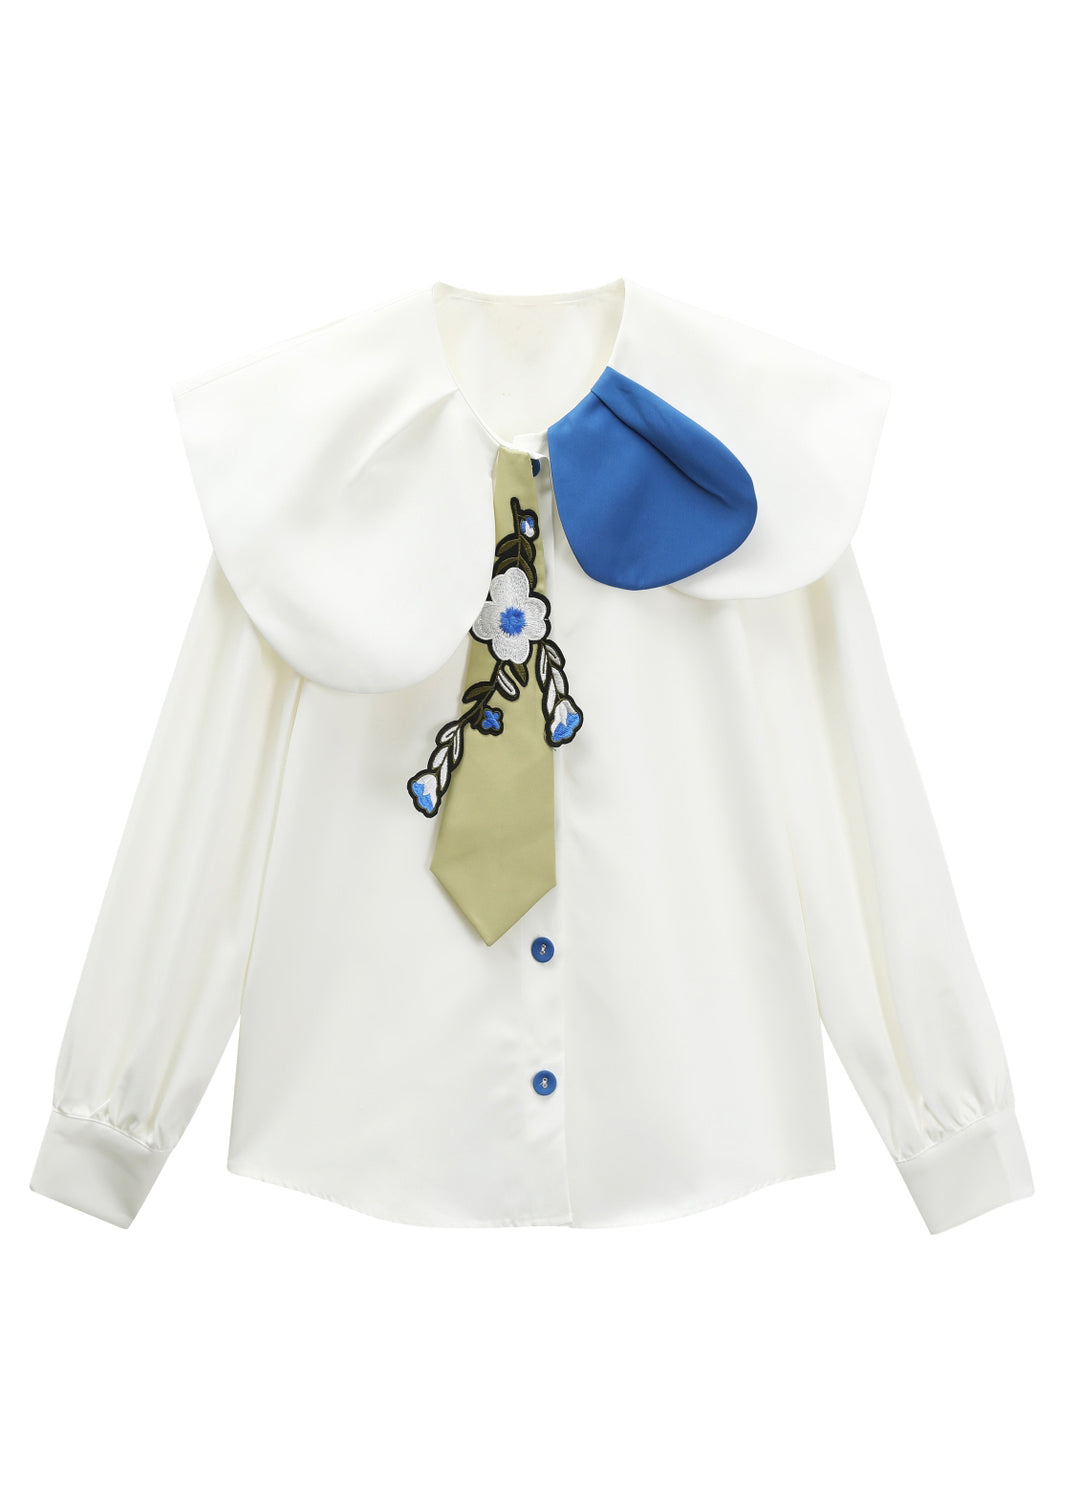 Fitted White Peter Pan Collar Embroideried Floral Button Satin Shirt Long Sleeve